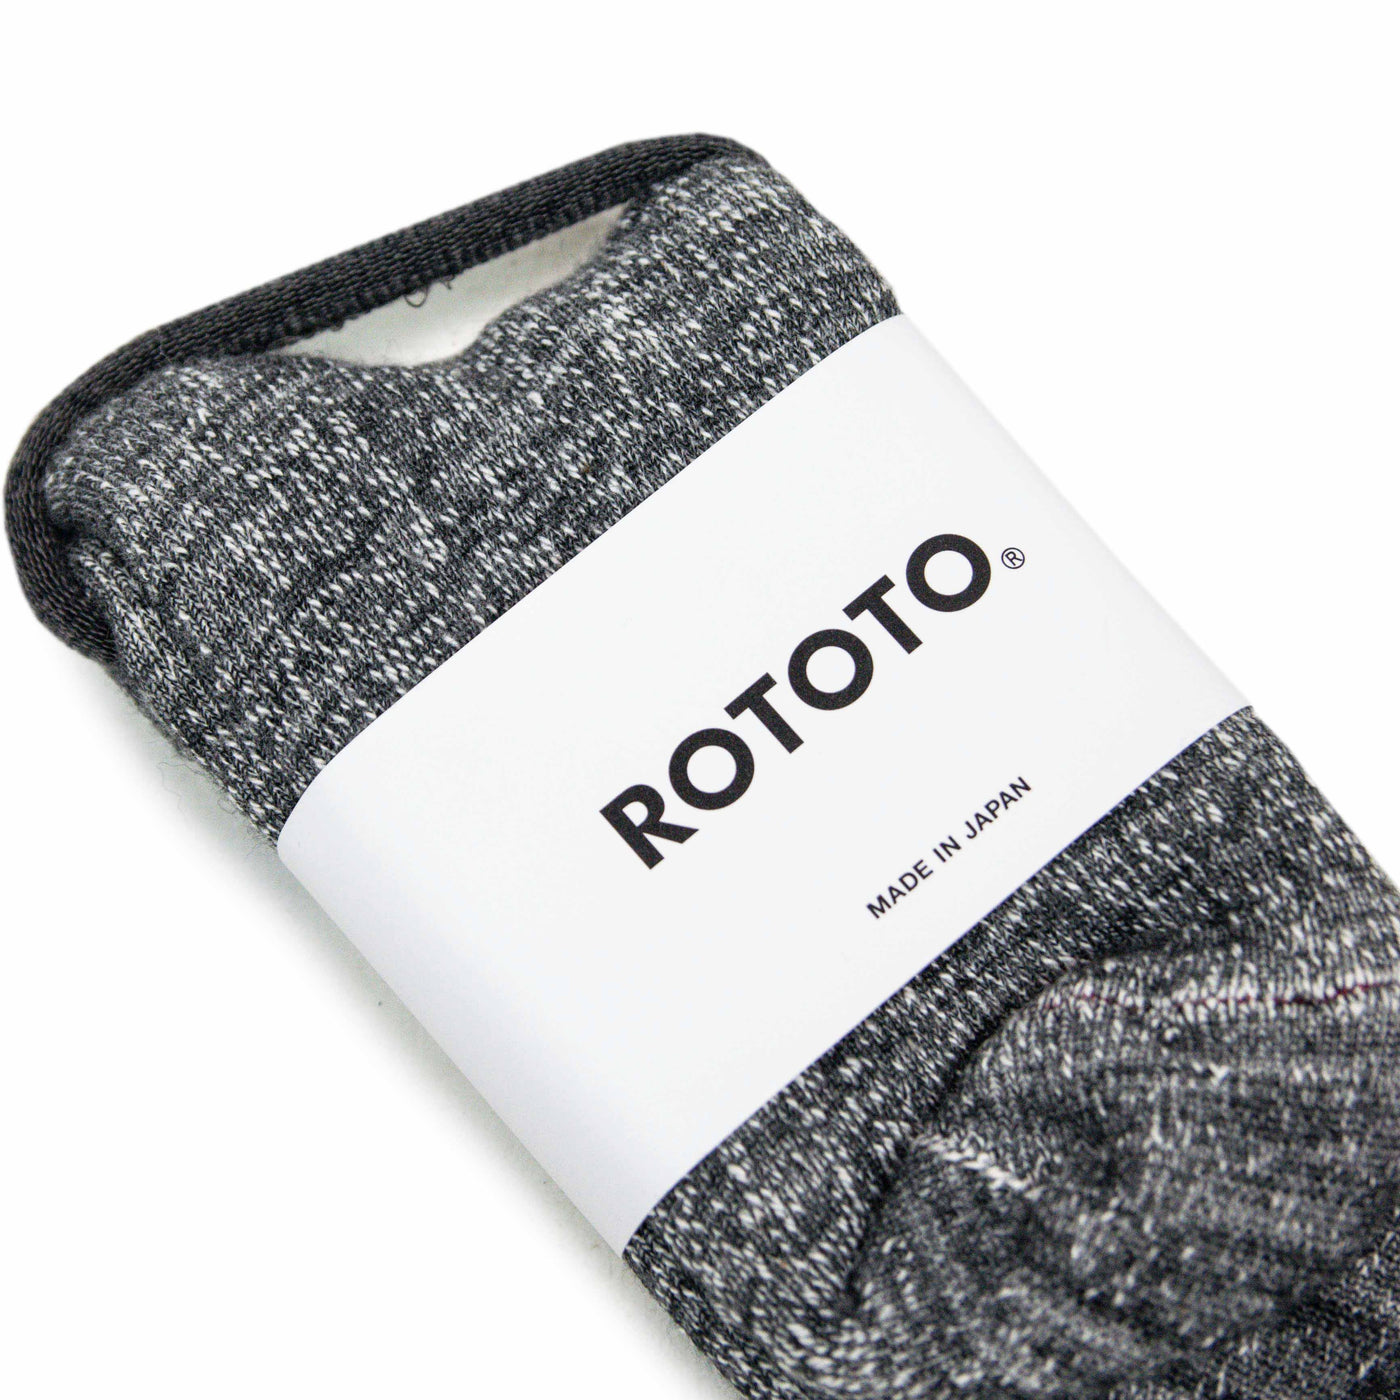 Rototo Double Faced Merino Socks Charcoal Made In Japan PACKAGING